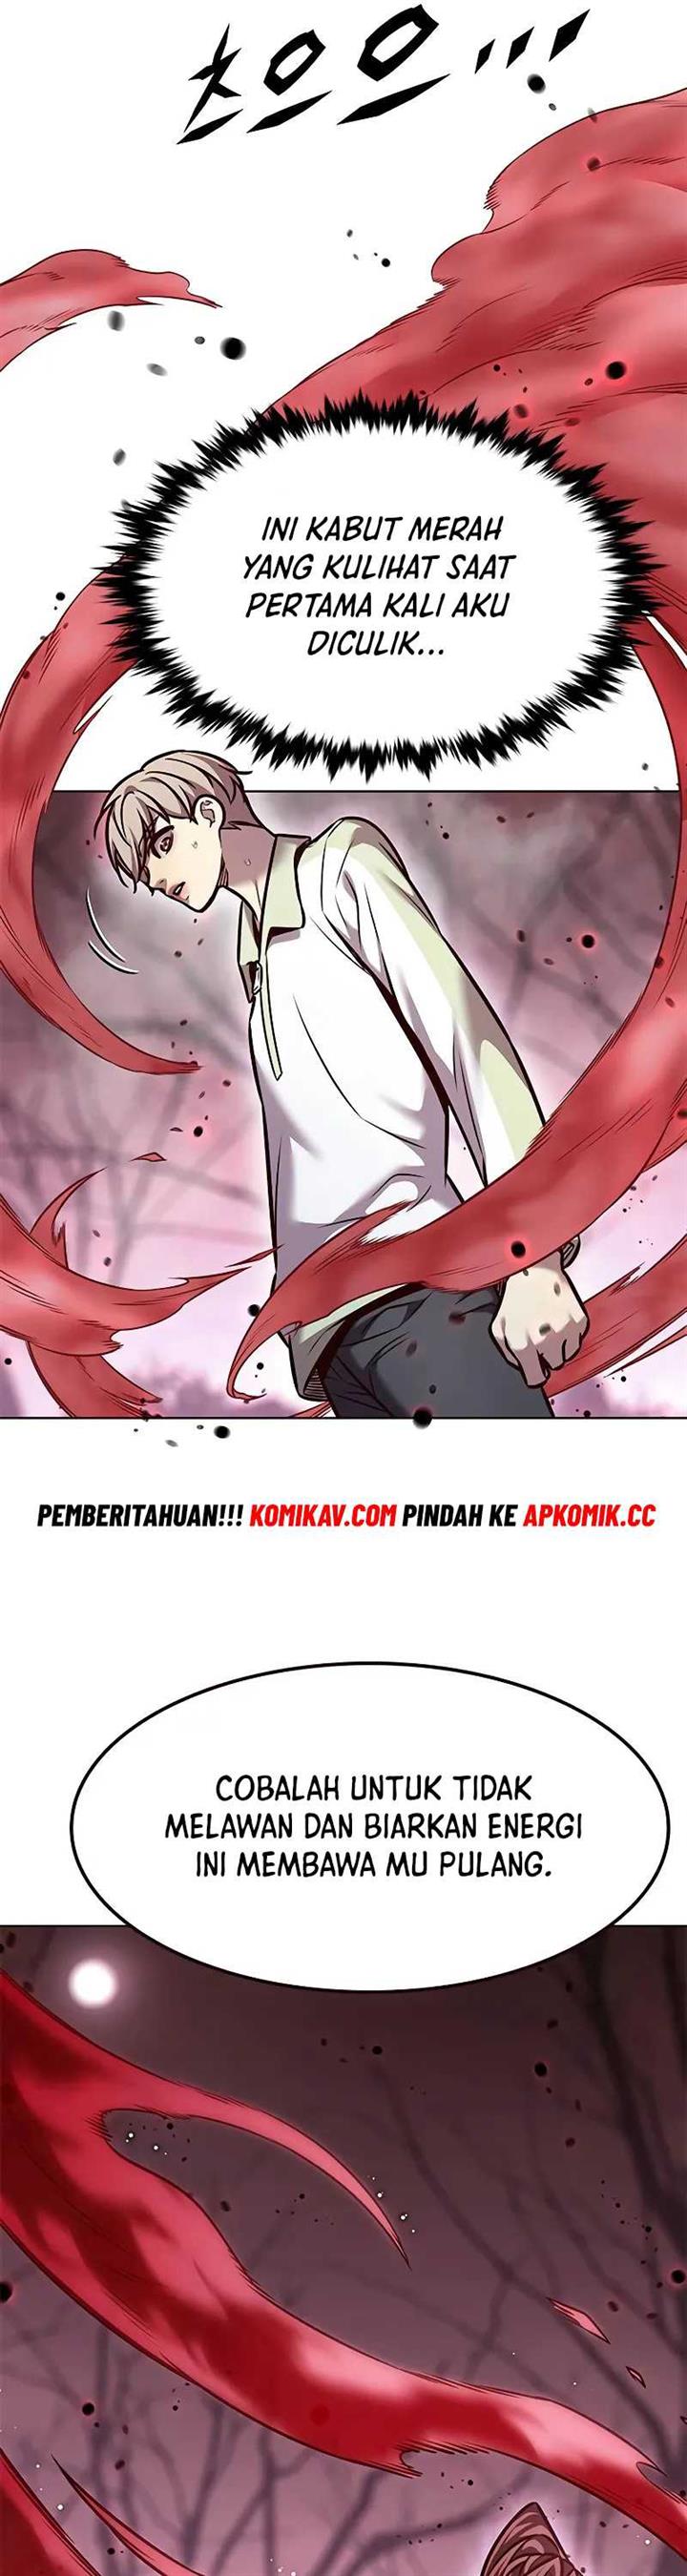 Eleceed Chapter 296